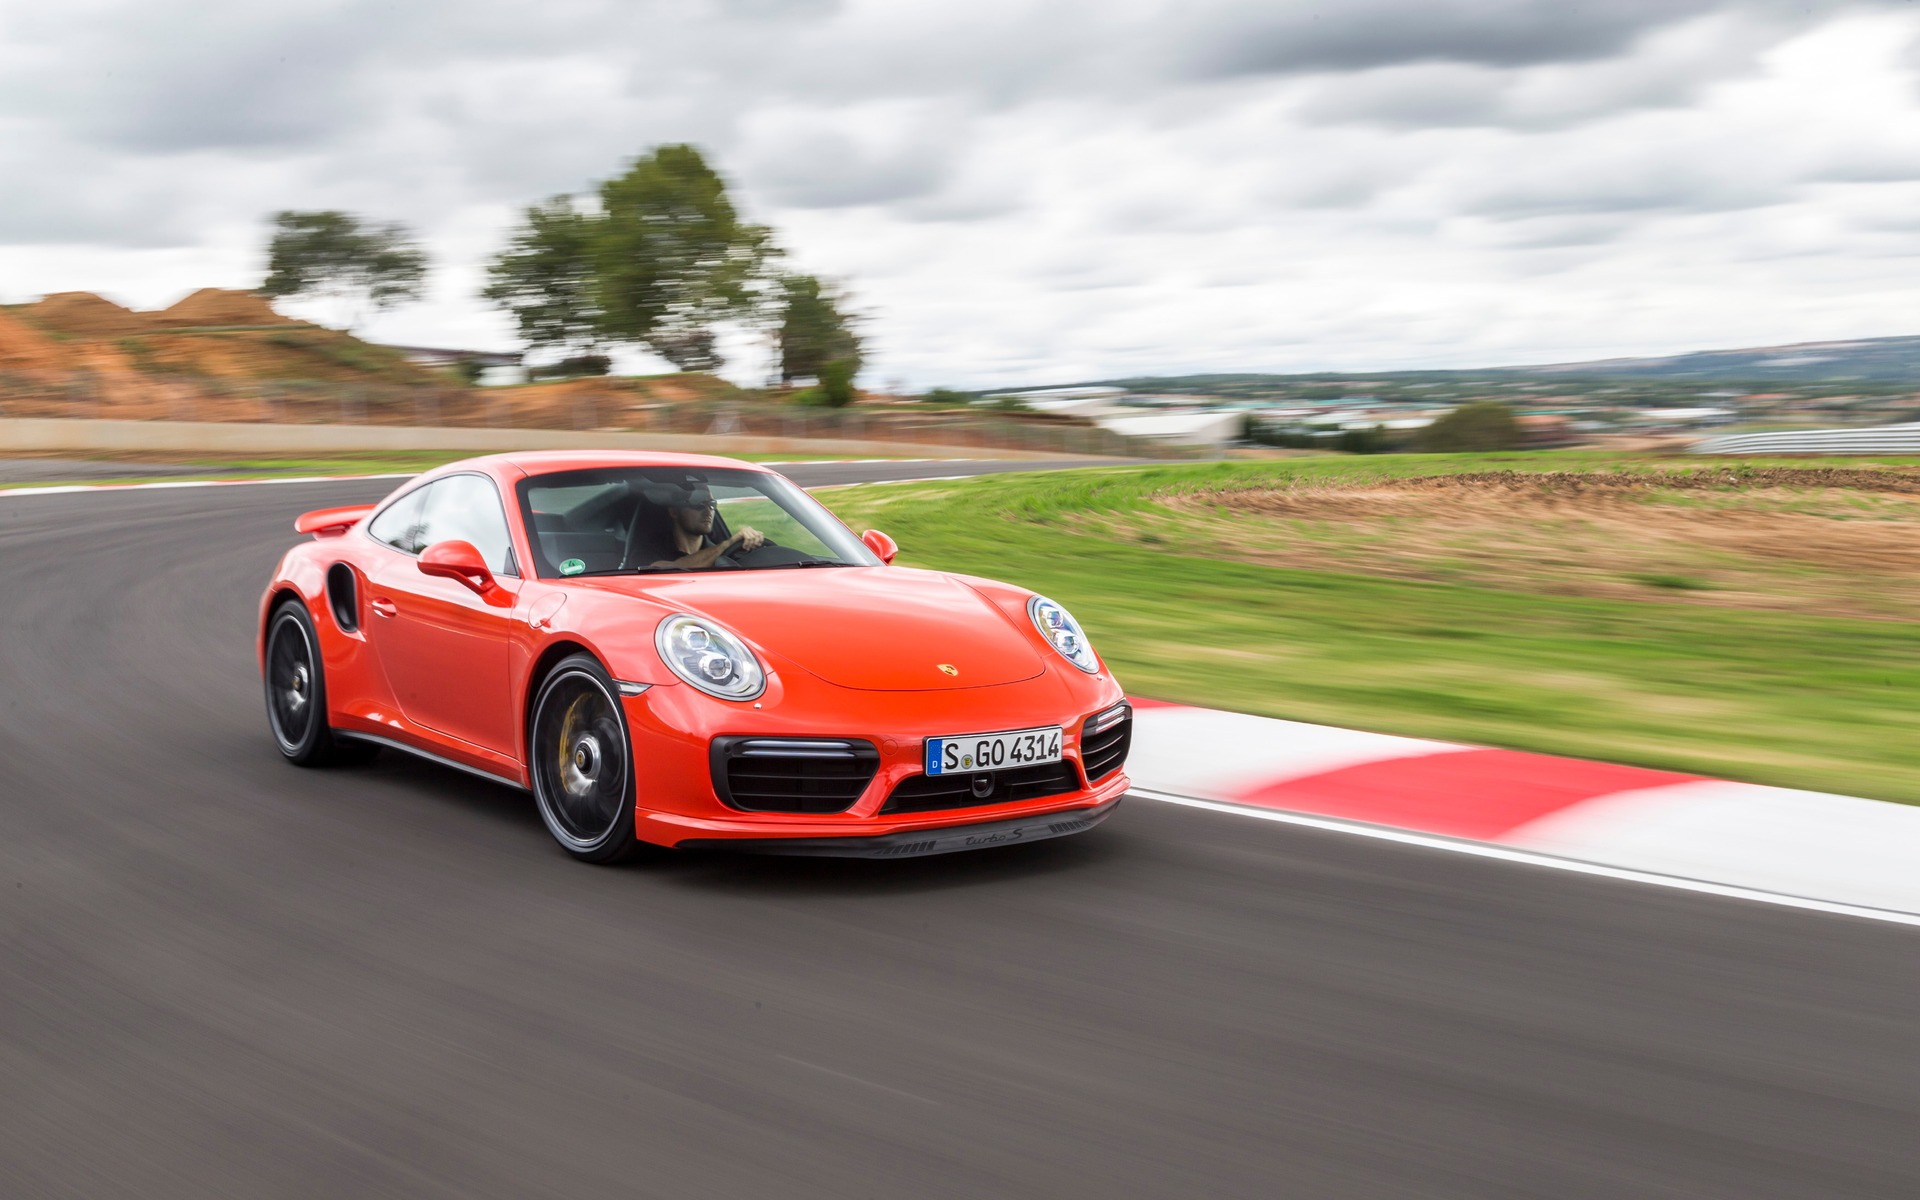 The 2017 Porsche 911 Turbo S on a track in South Africa